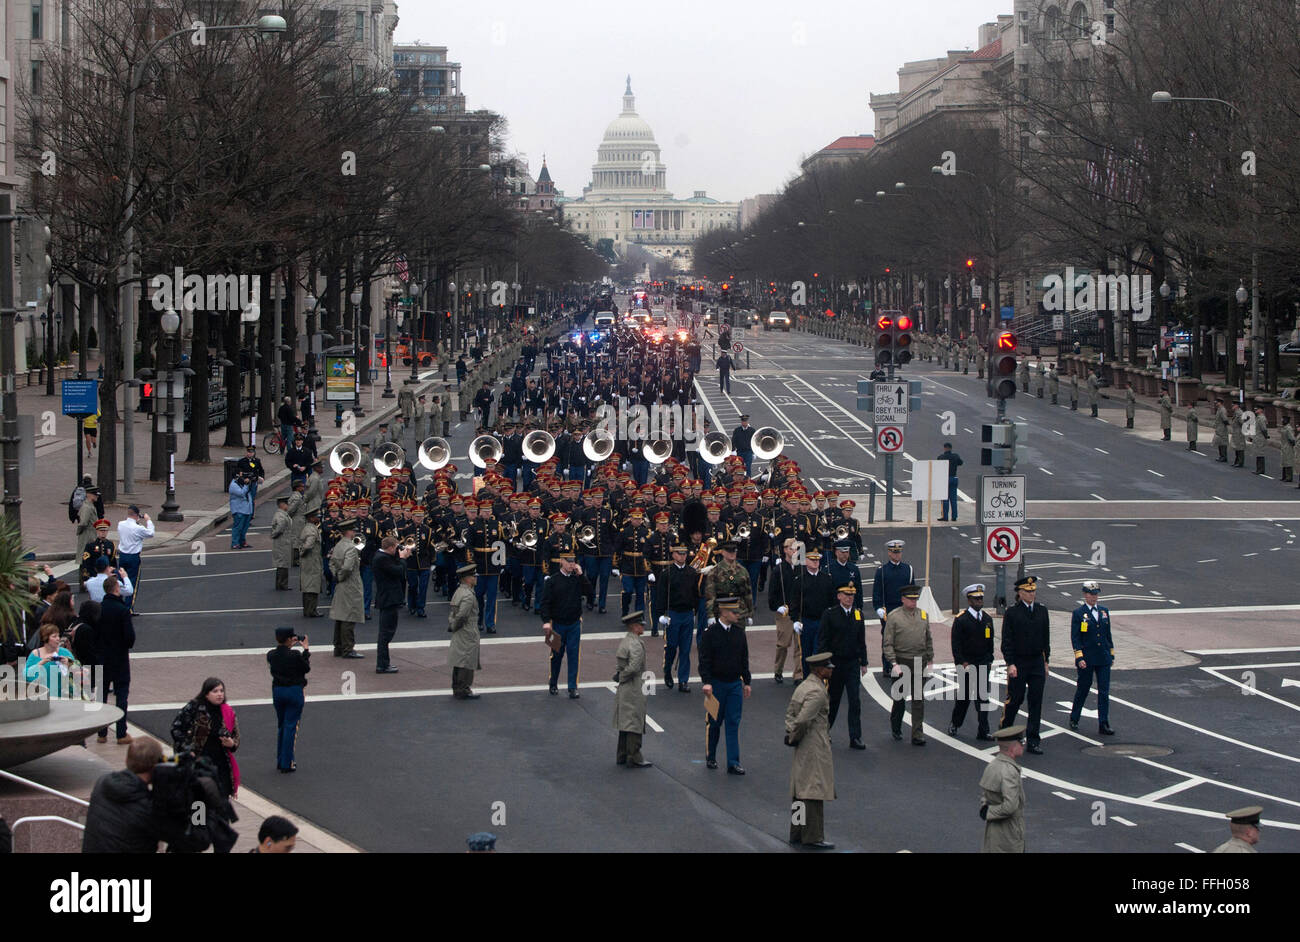 Military personnel and band members take part in the presidential inauguration rehearsal in Washington, D.C. Stock Photo